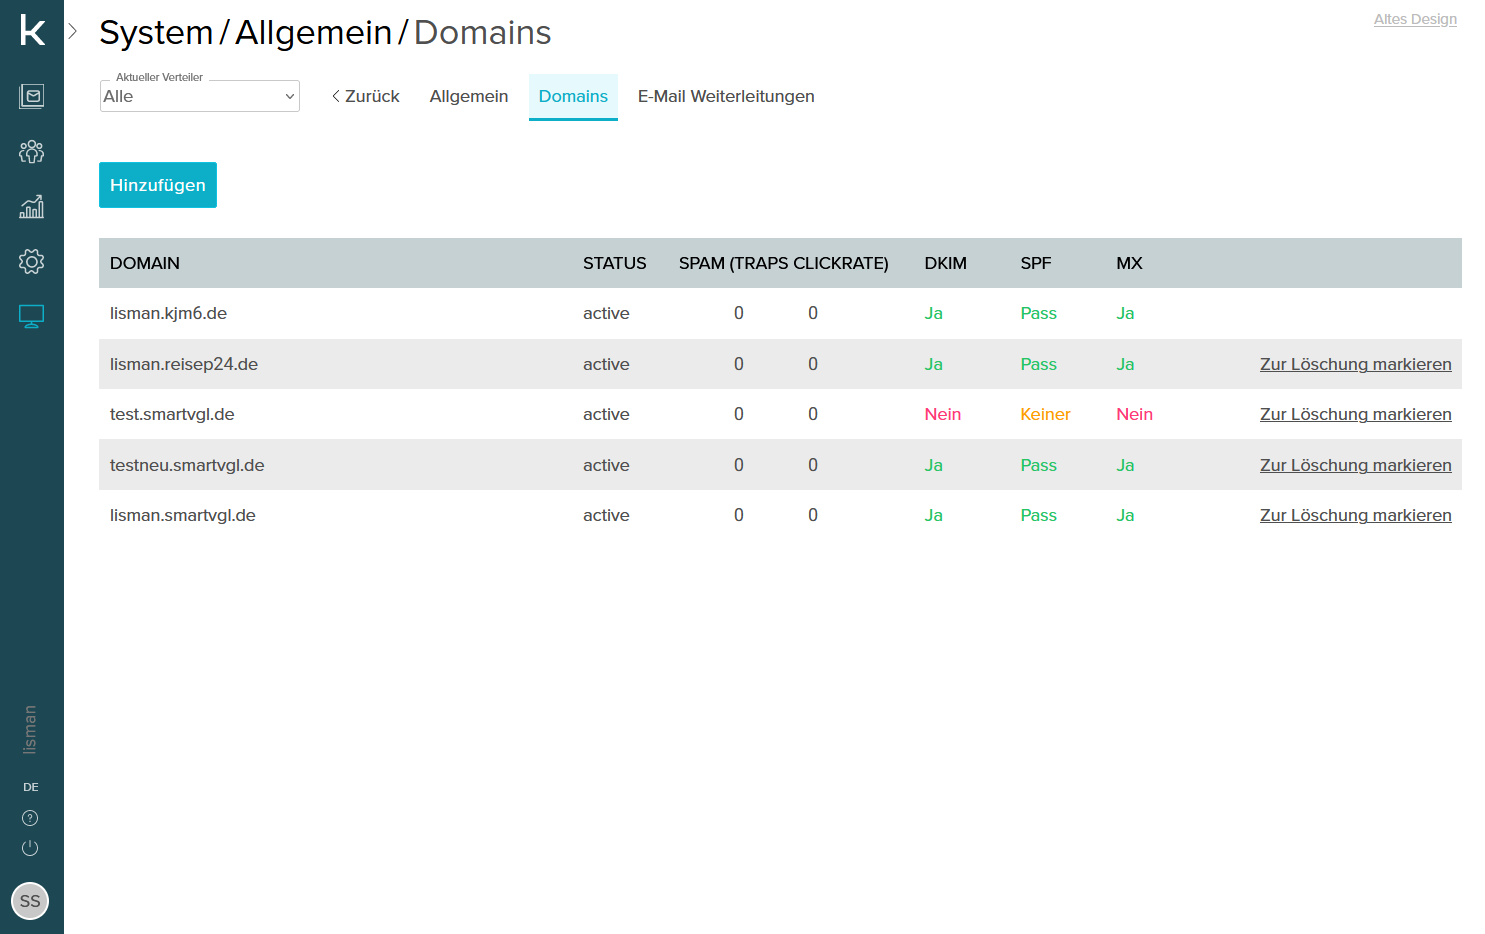 Domains overview